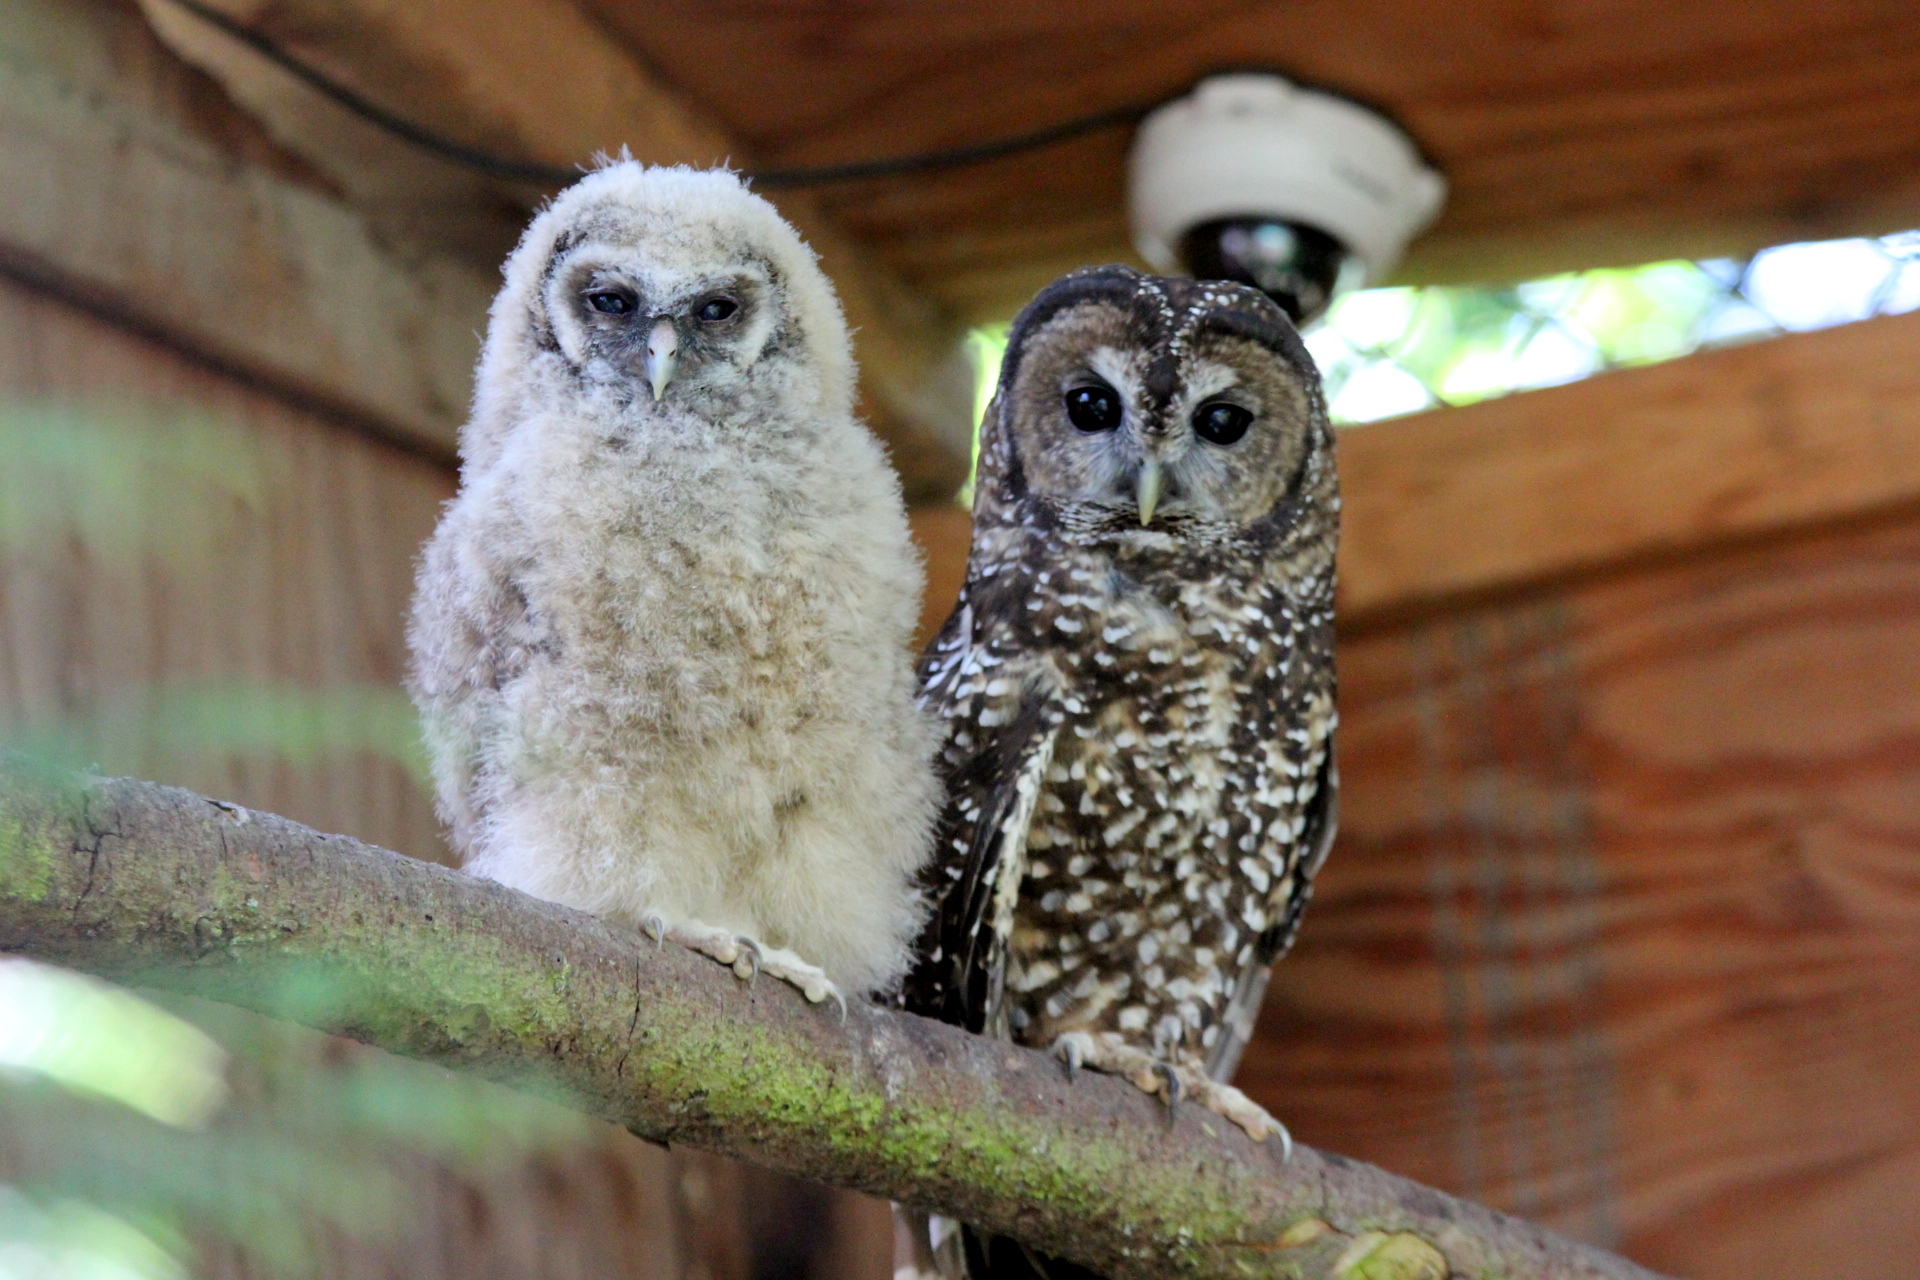 A spotted owl and youngster at the breeding facility. Photo: Northern Spotted Owl Breeding Program